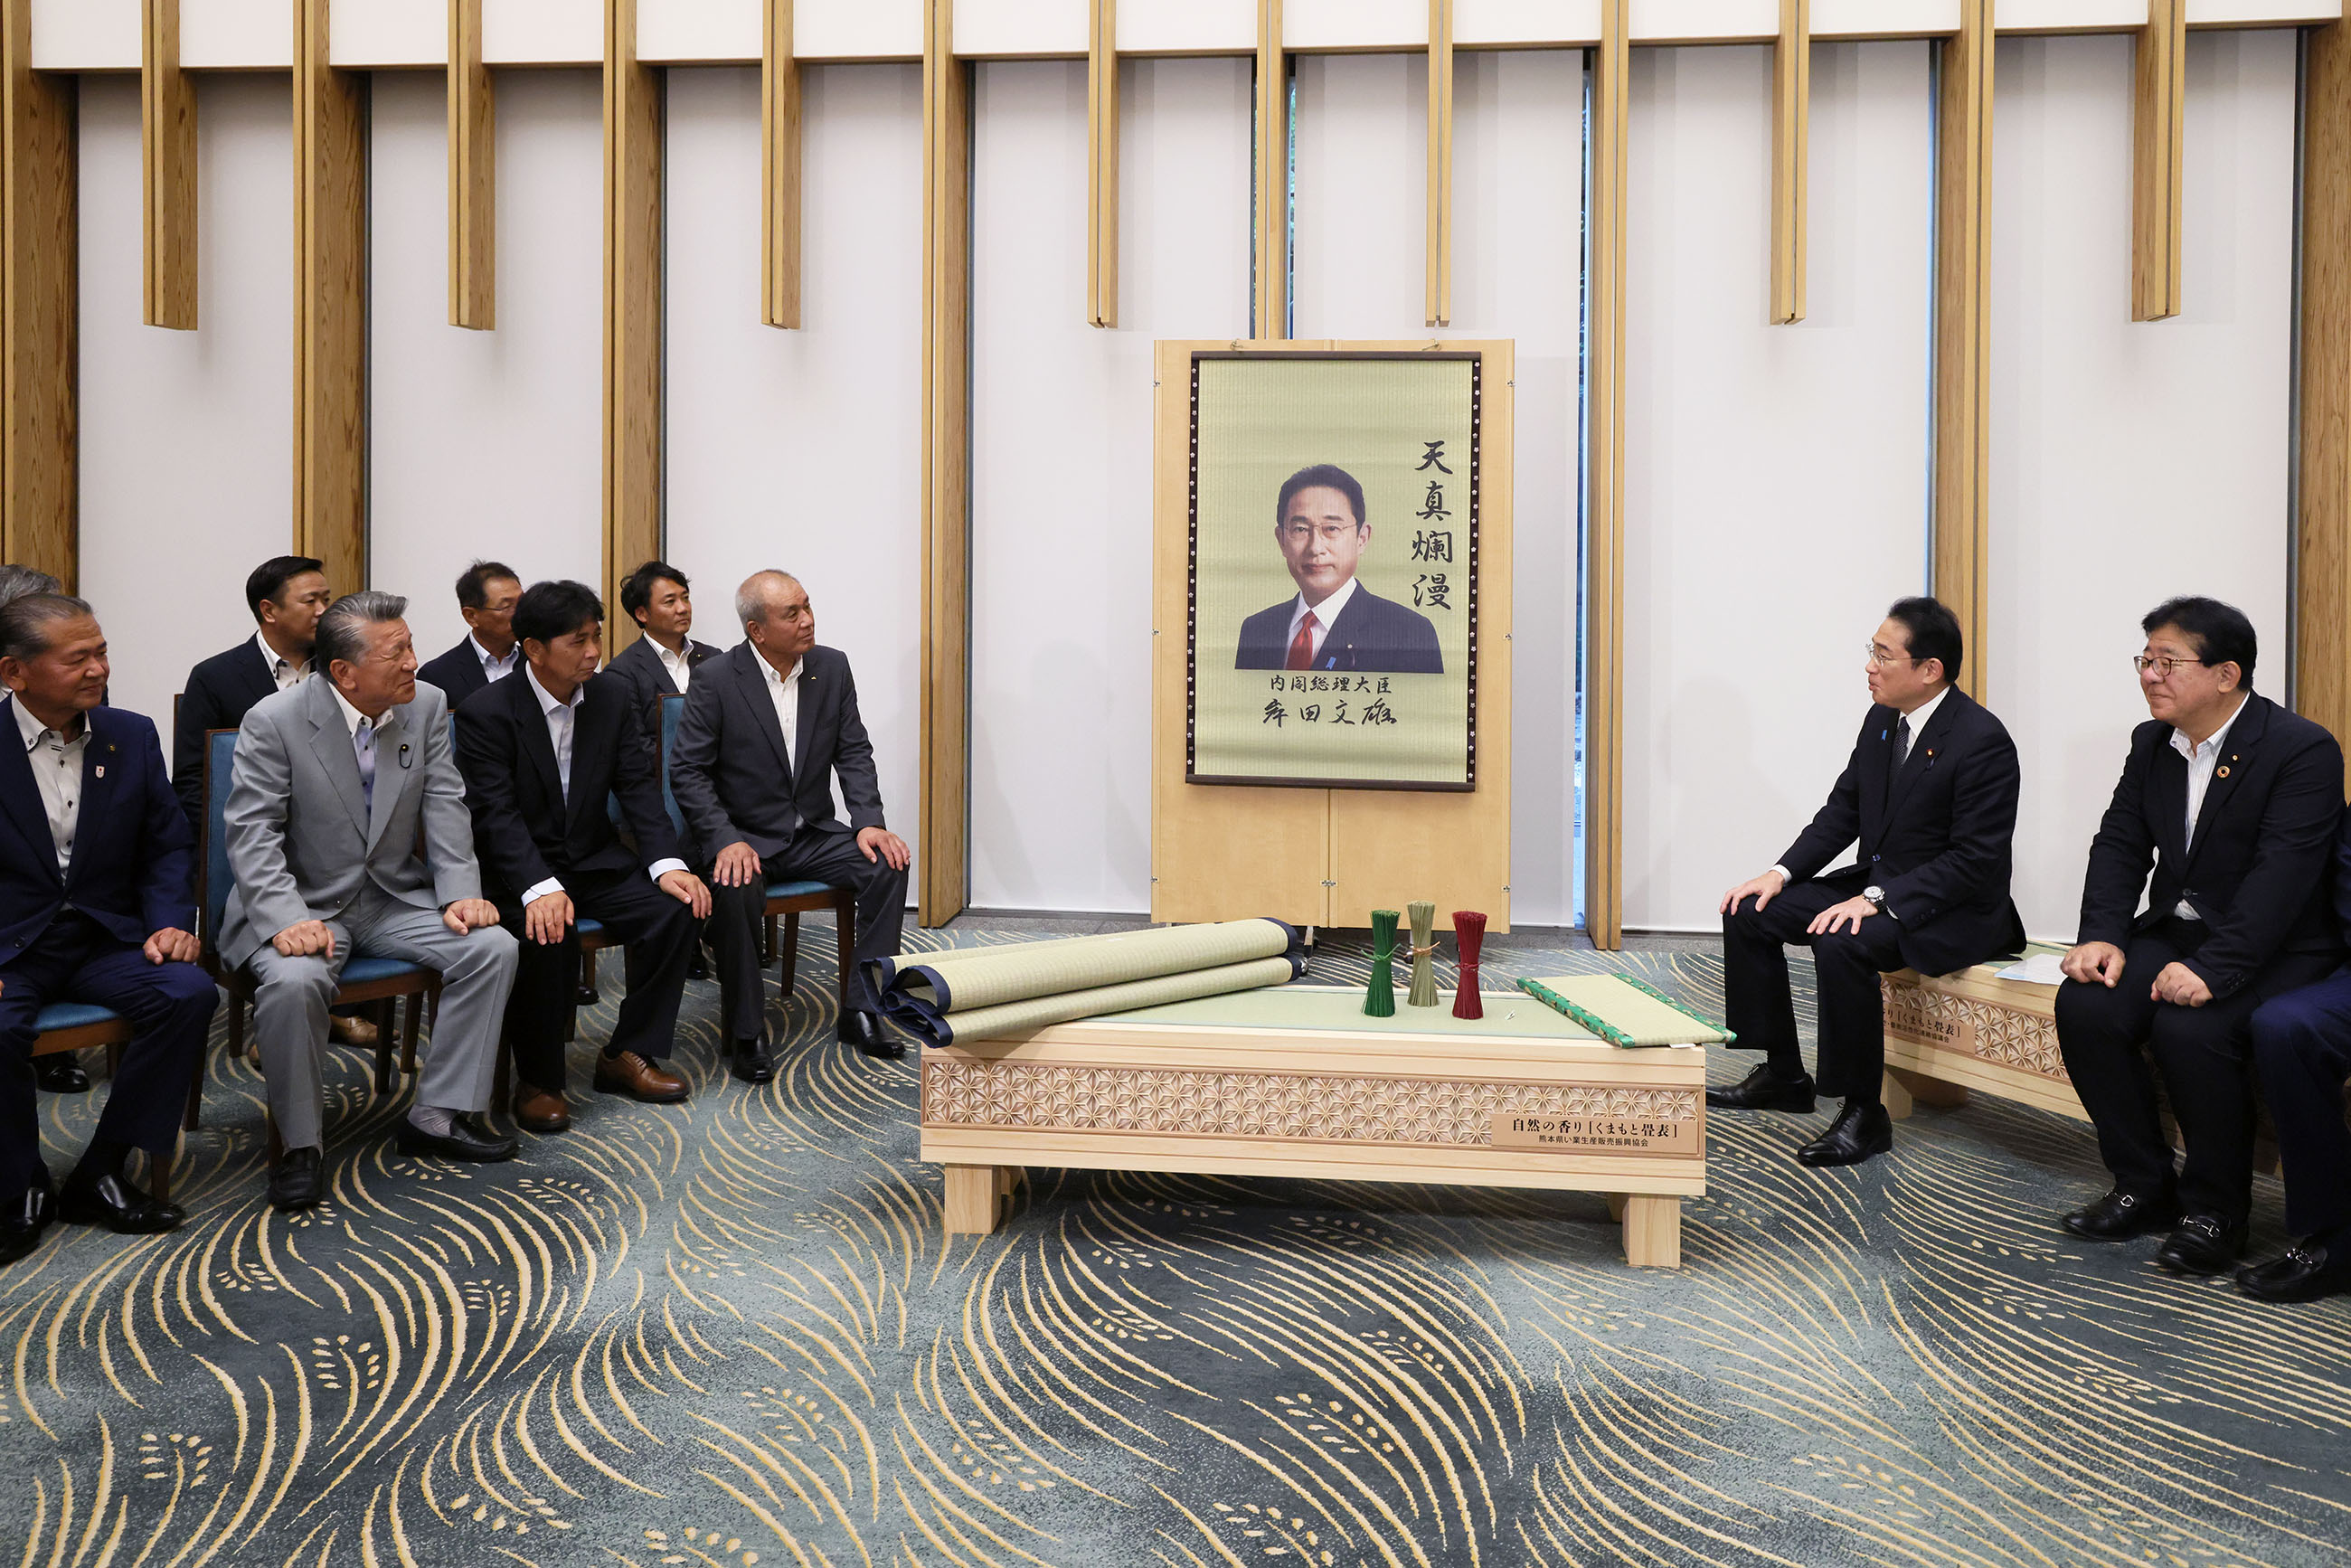 Prime Minister Kishida being presented with igusa products (4)